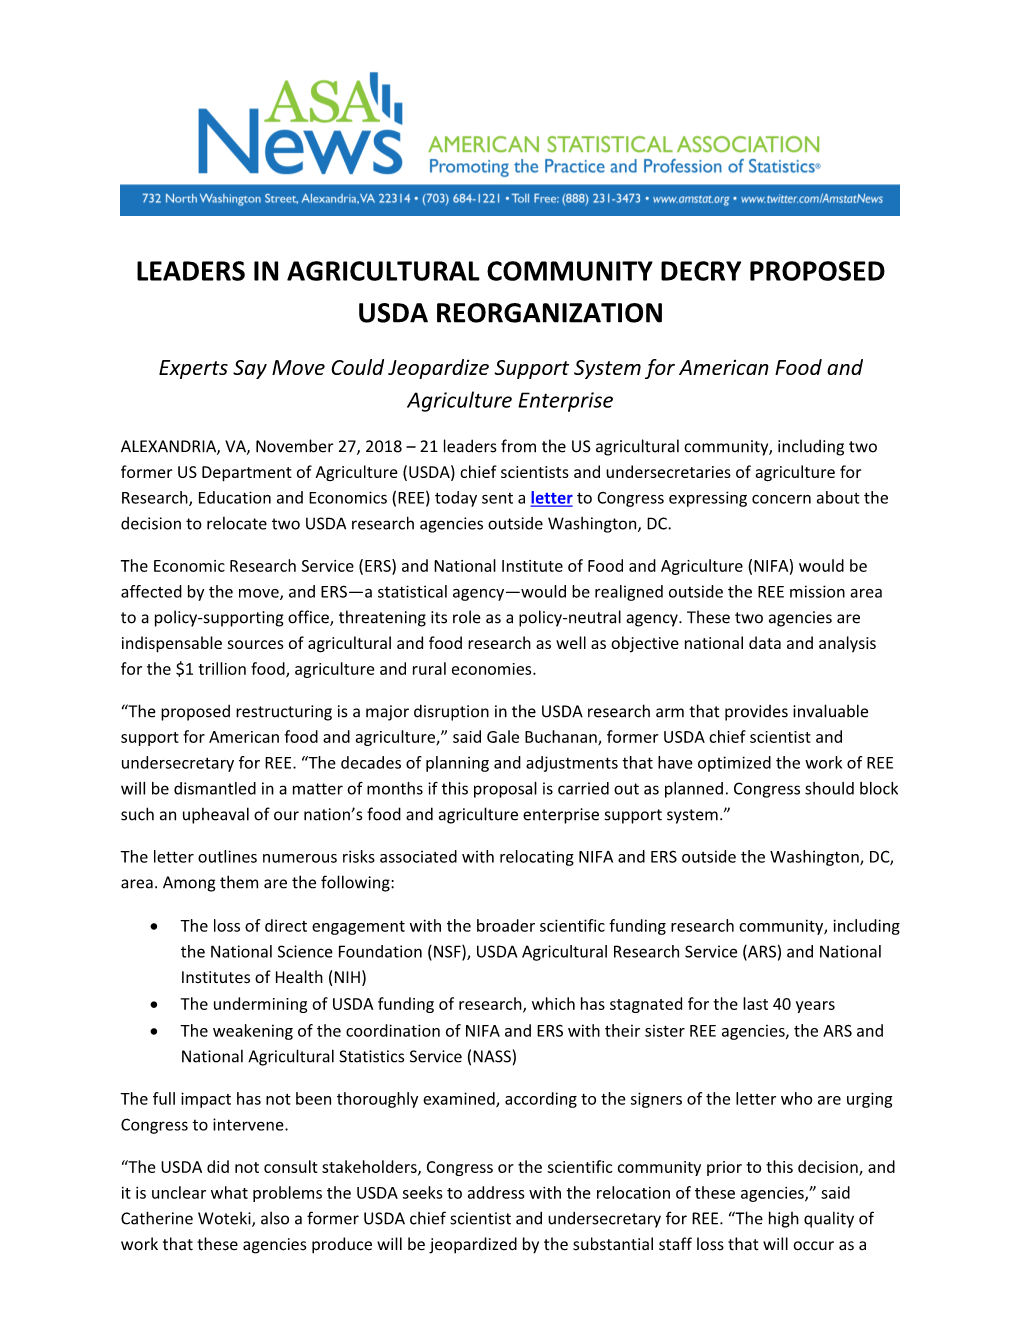 Leaders in Agricultural Community Decry Proposed Usda Reorganization